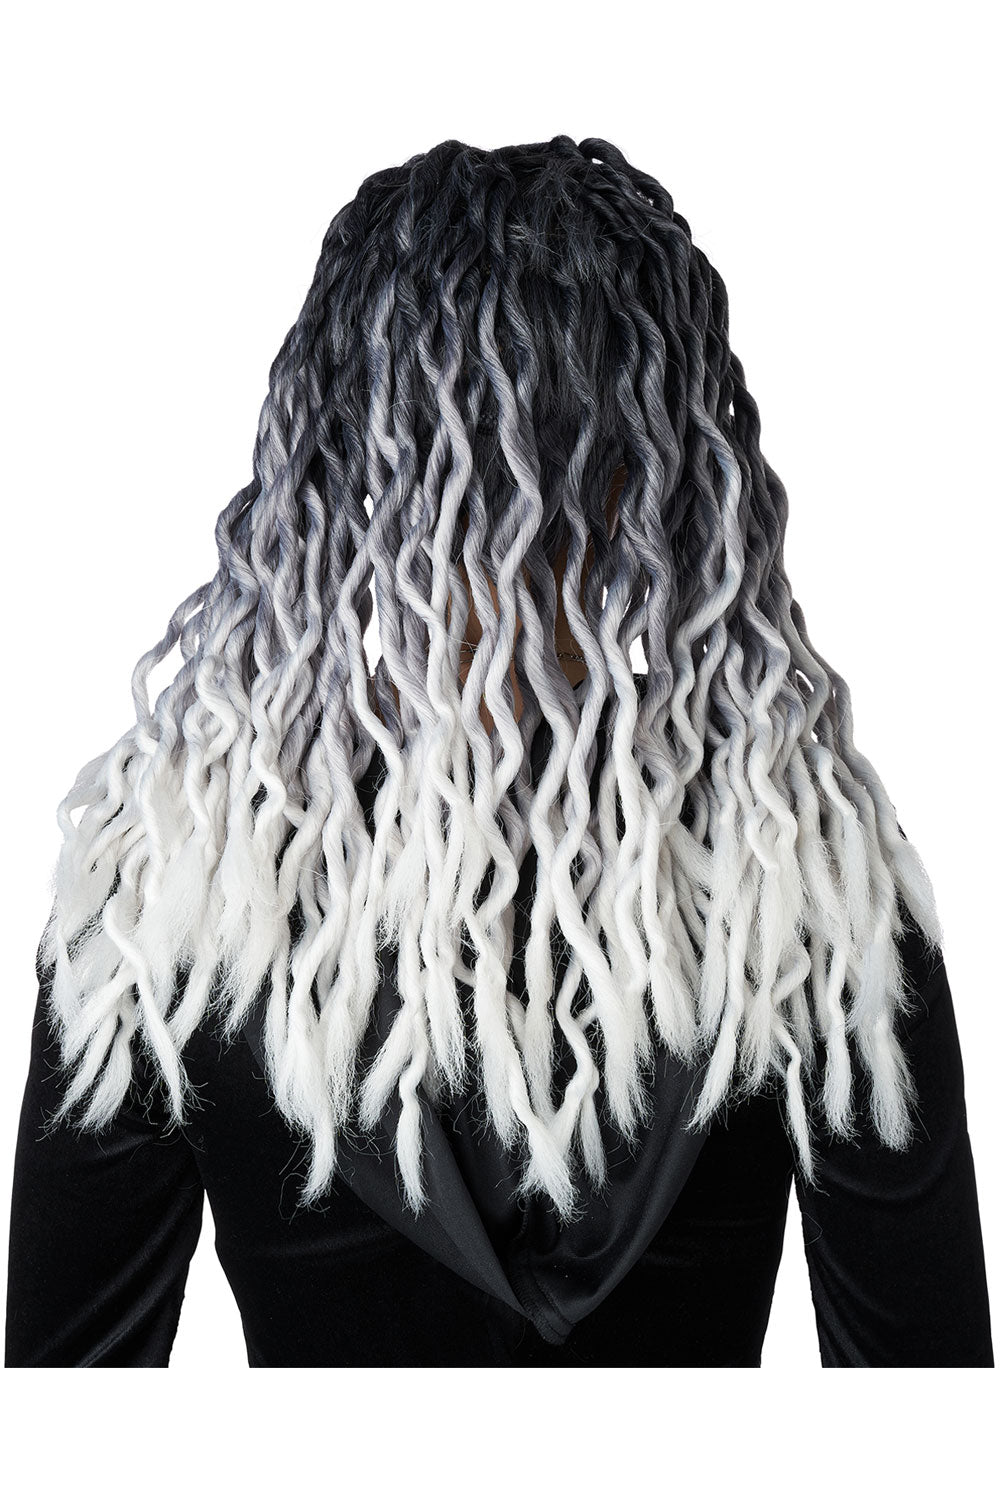 Ombre Crinkle Dreads Wig California Costume 7021-205